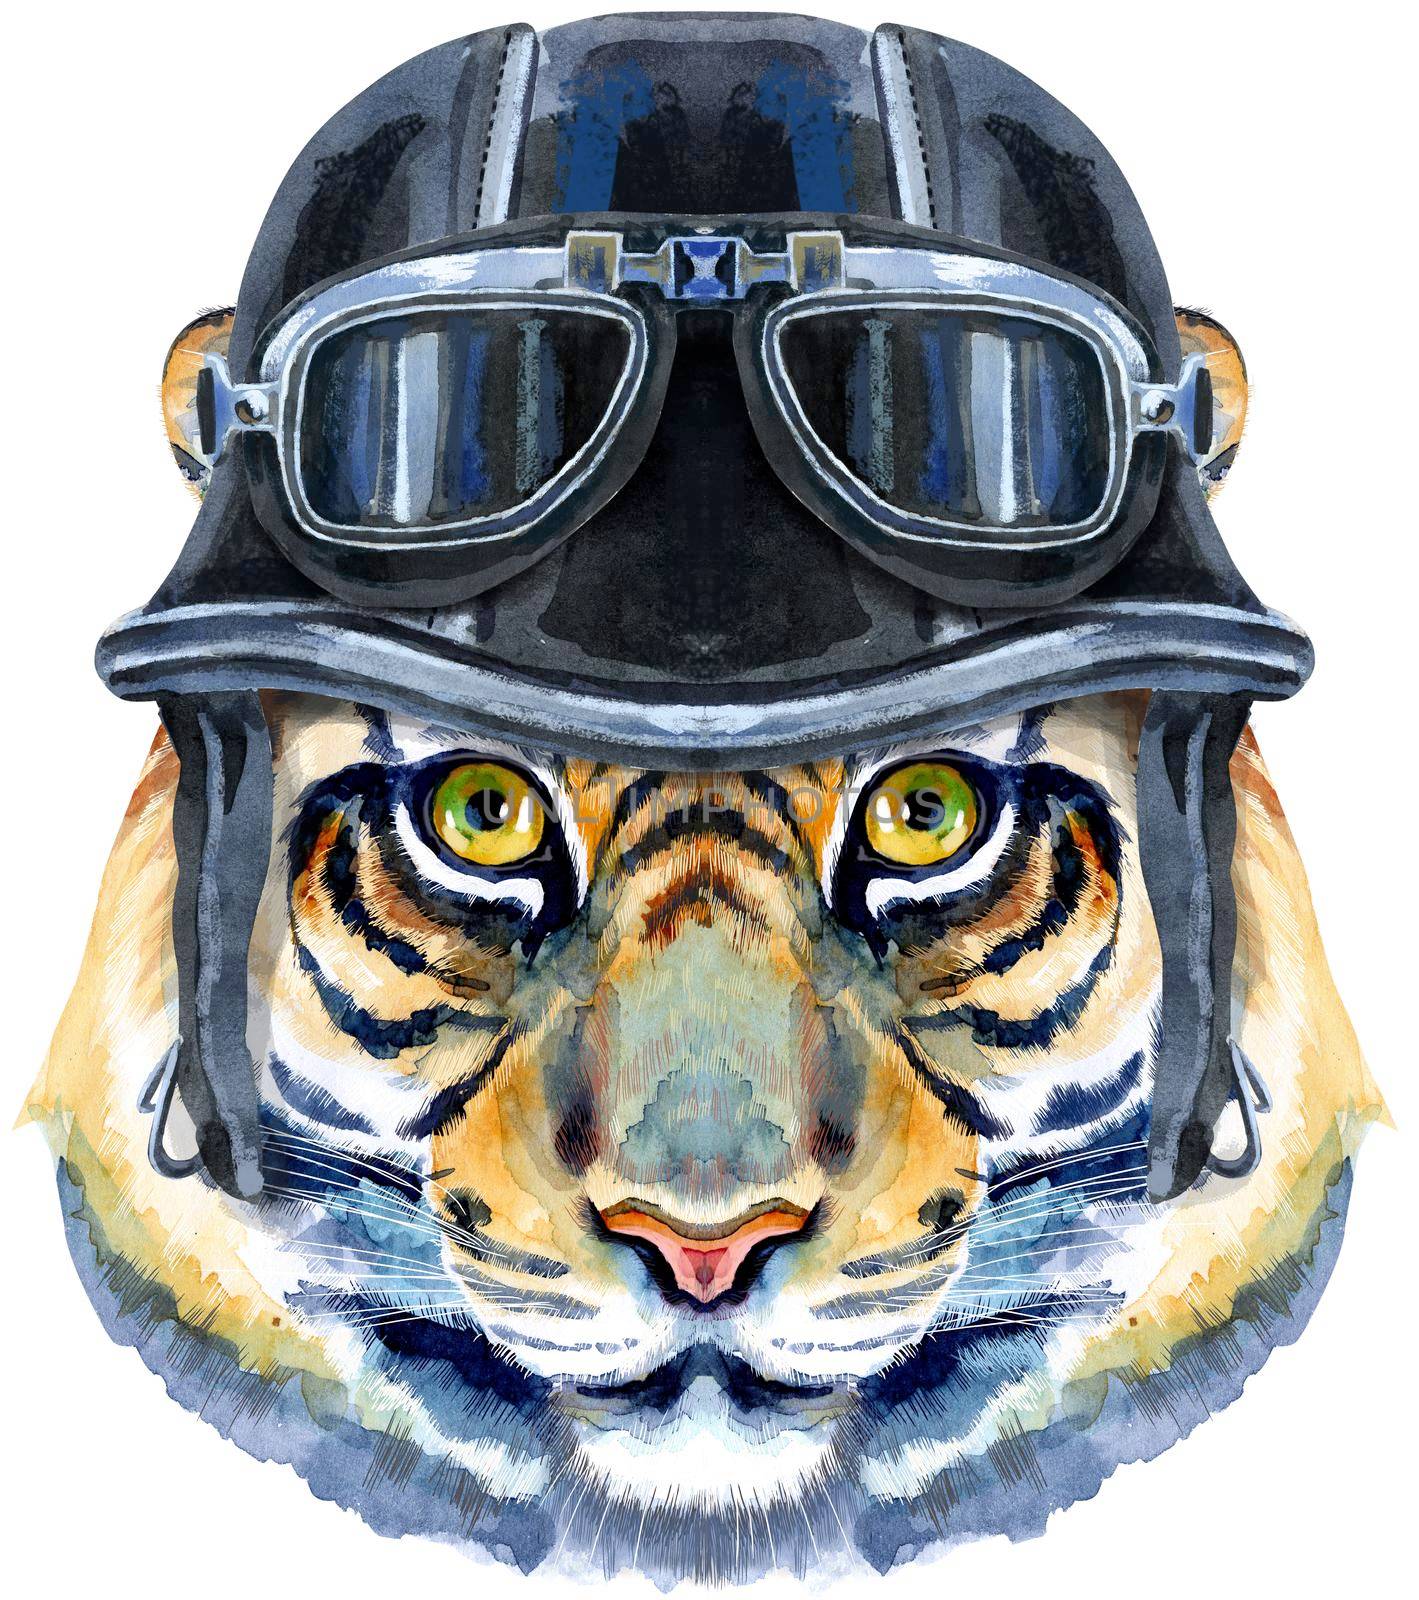 Tiger horoscope character watercolor illustration with biker helmet isolated on white background. by NataOmsk